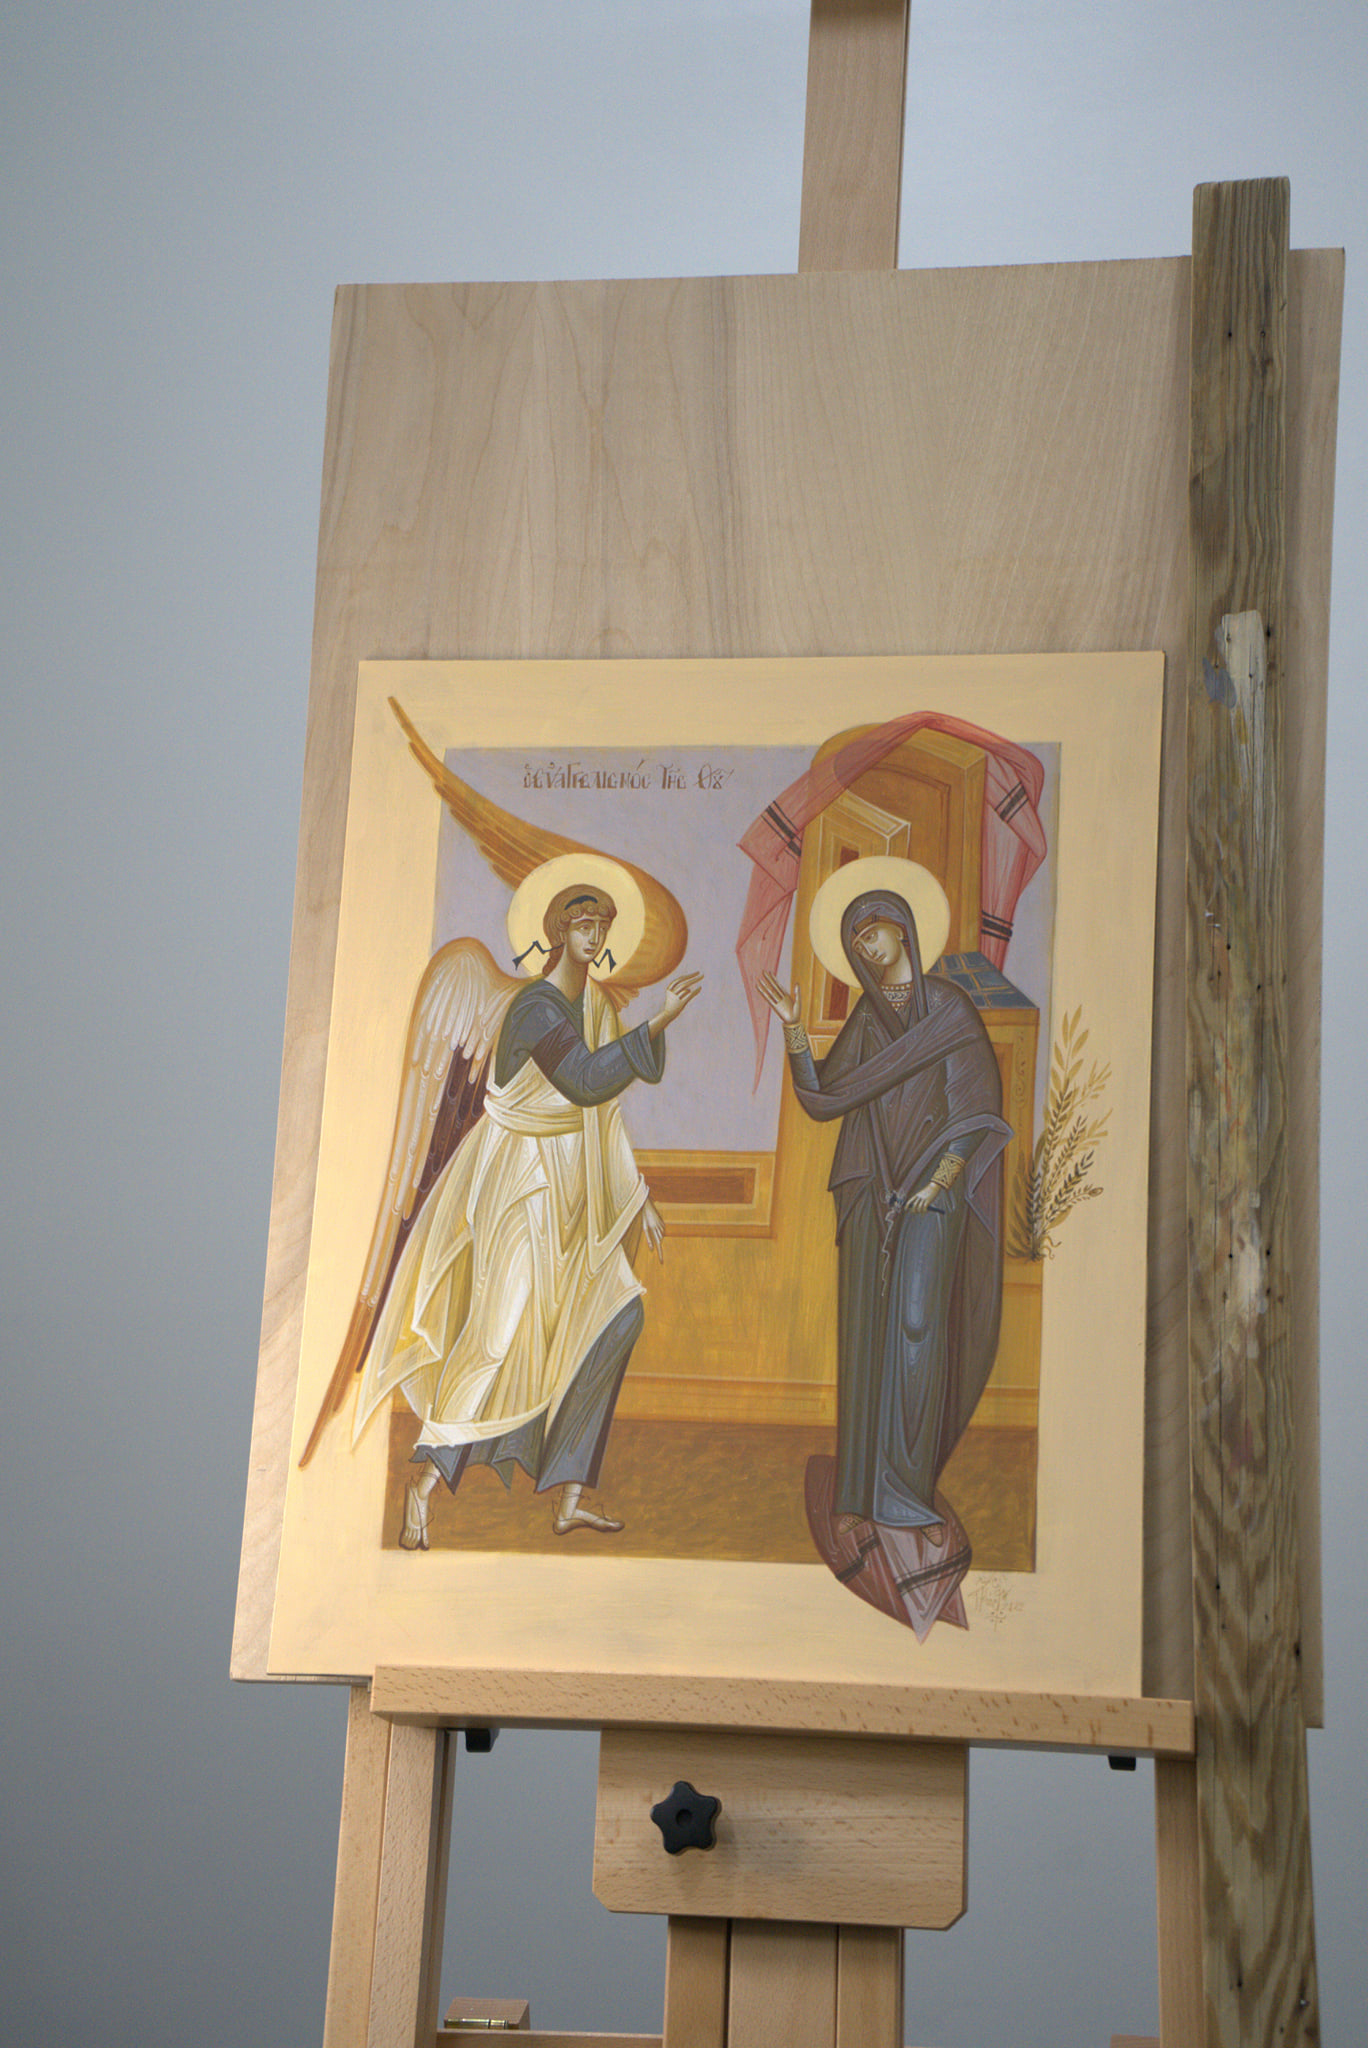 Completed icon of the Annunciation by Dr Kordis on display at the workshop